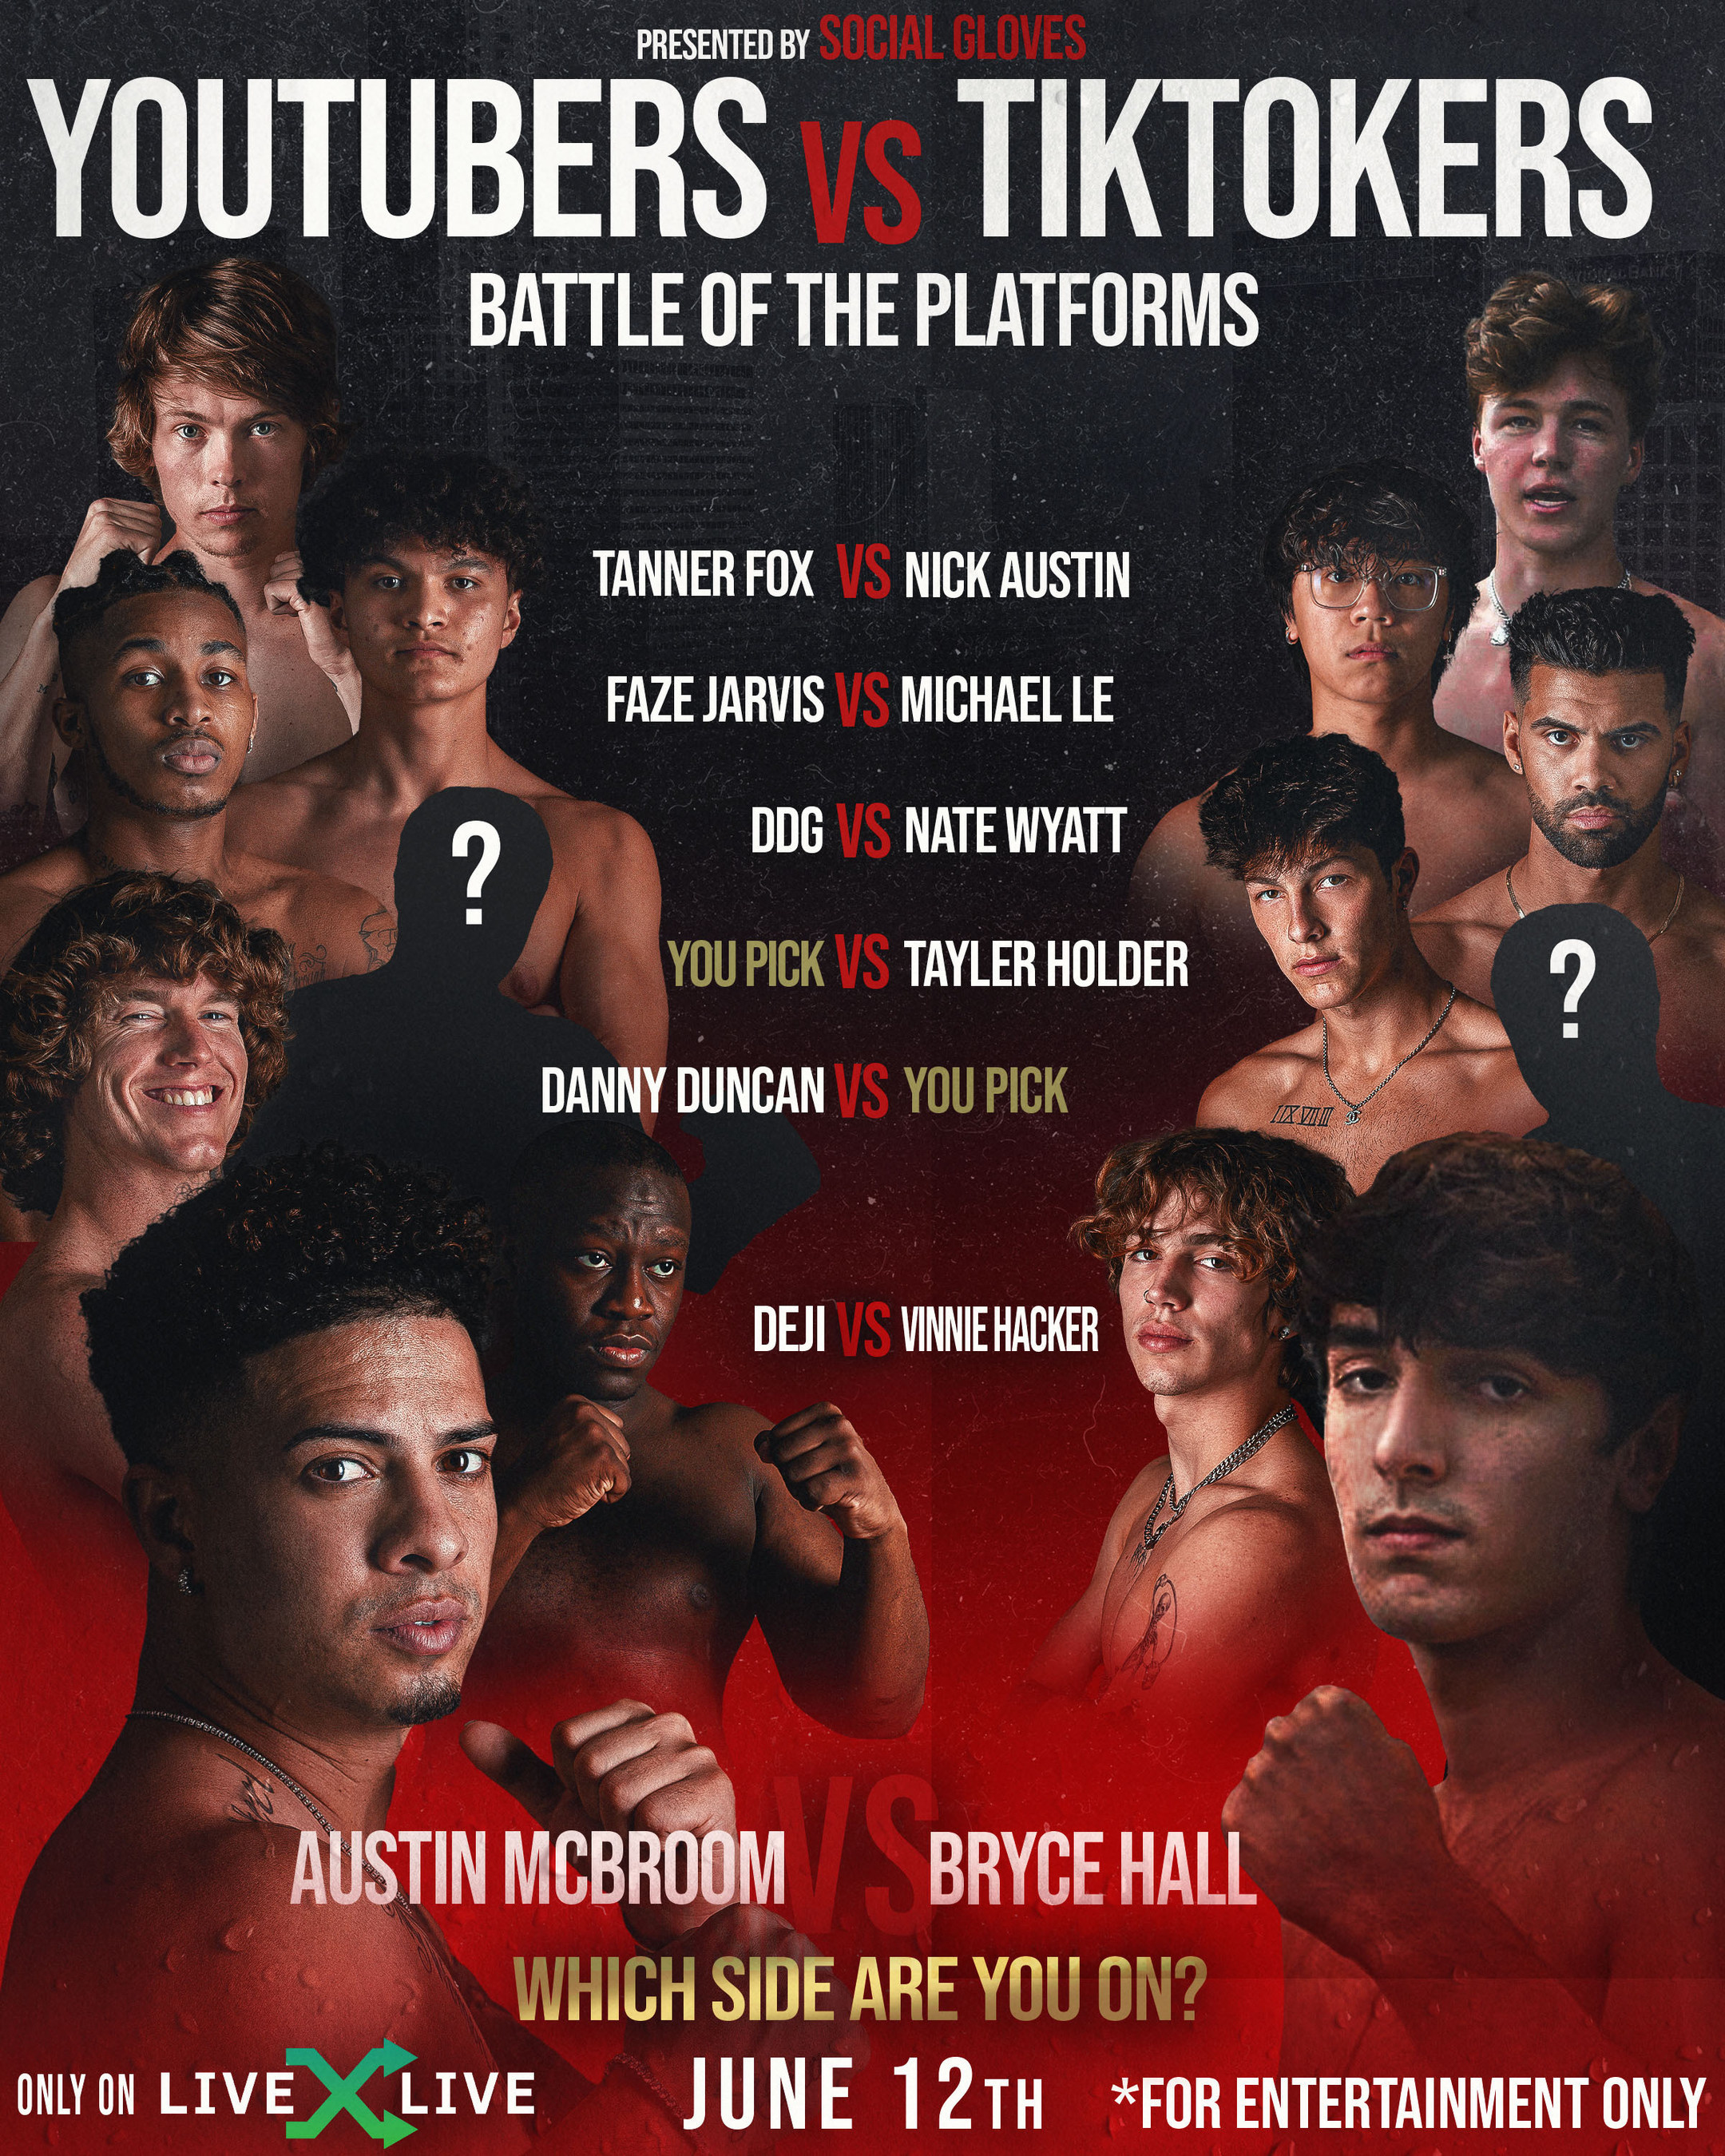 When Is Austin And Bryce Fight Bryce Hall And Austin Mcbroom Are Fighting Online Lyrics Story The Referee Interrupted The Fight Multiple Times To Tell Hall To Keep The Fight